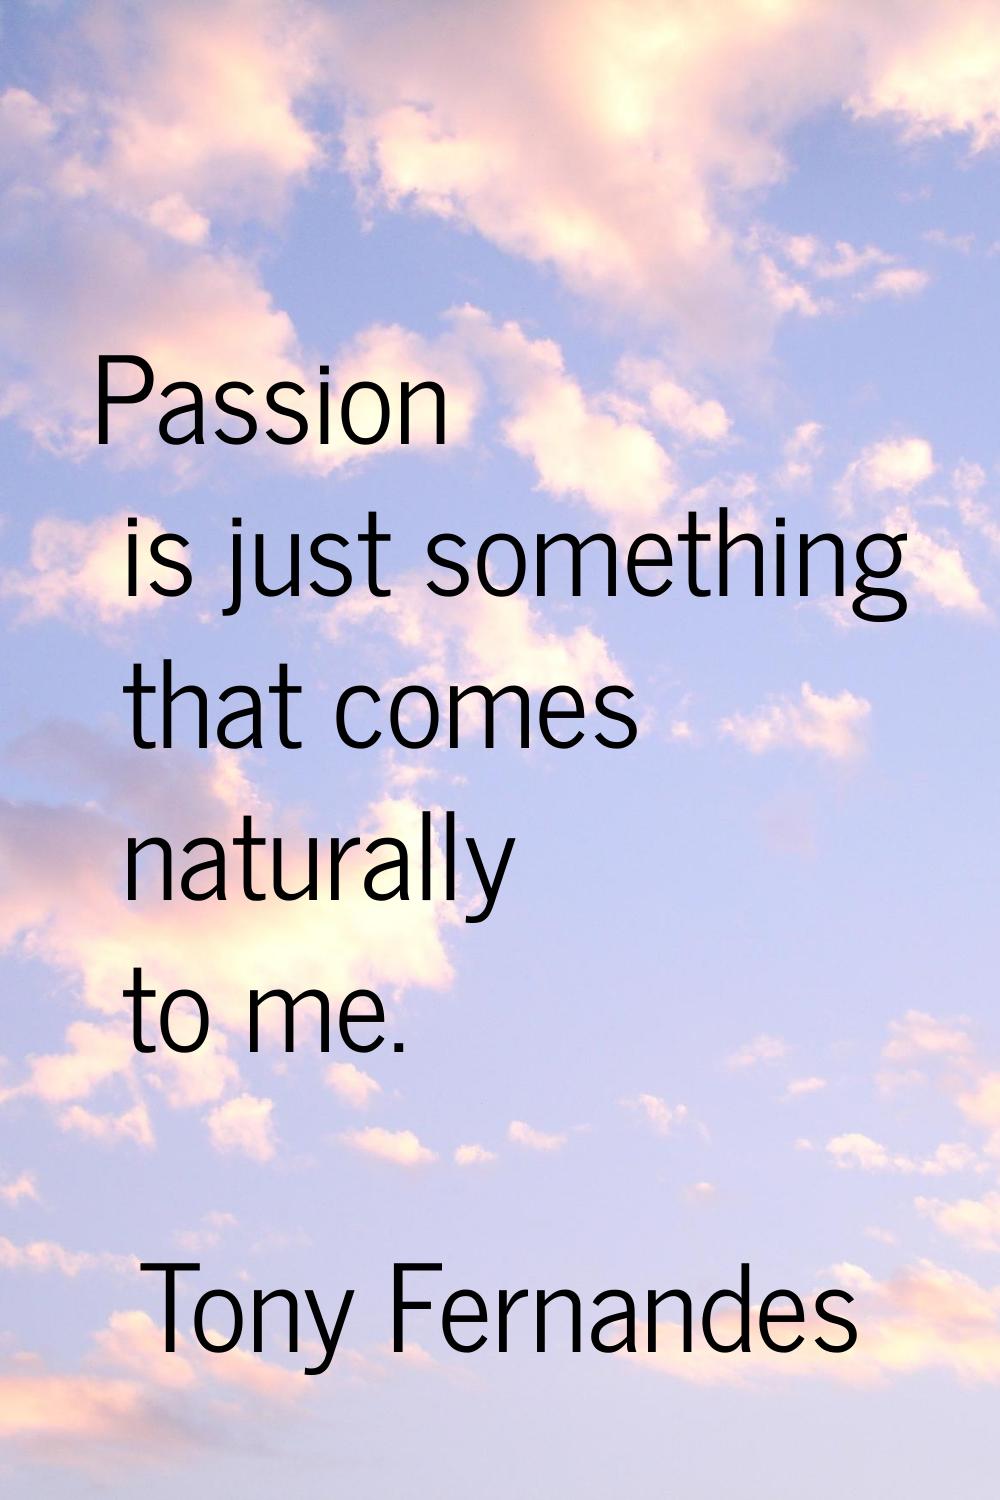 Passion is just something that comes naturally to me.